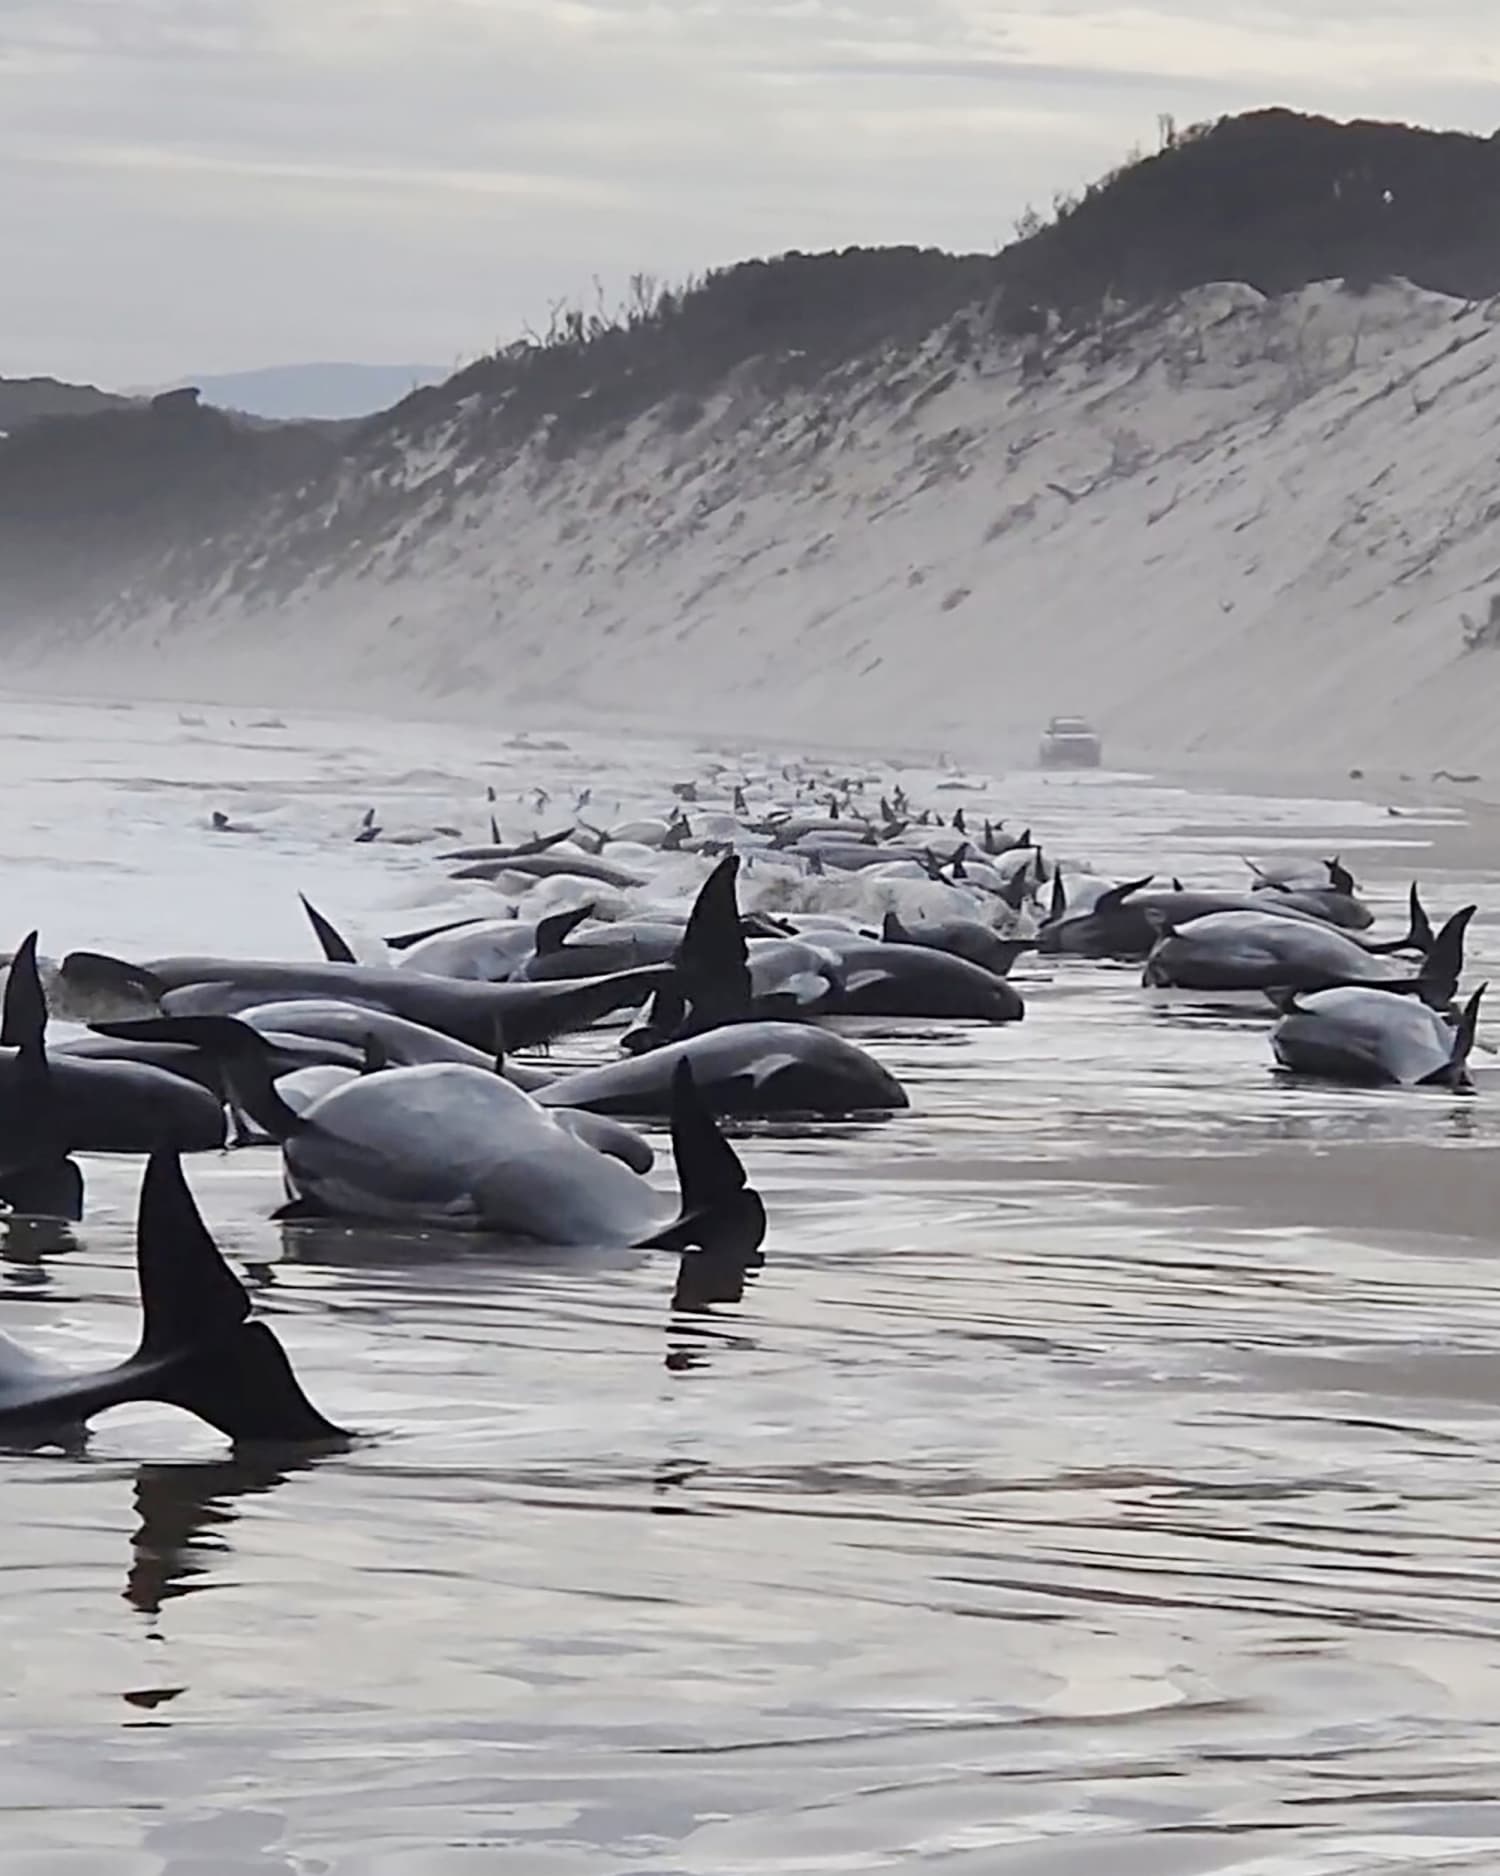 51 Whales Dead After Beaching In Australia, Efforts On To Save 46